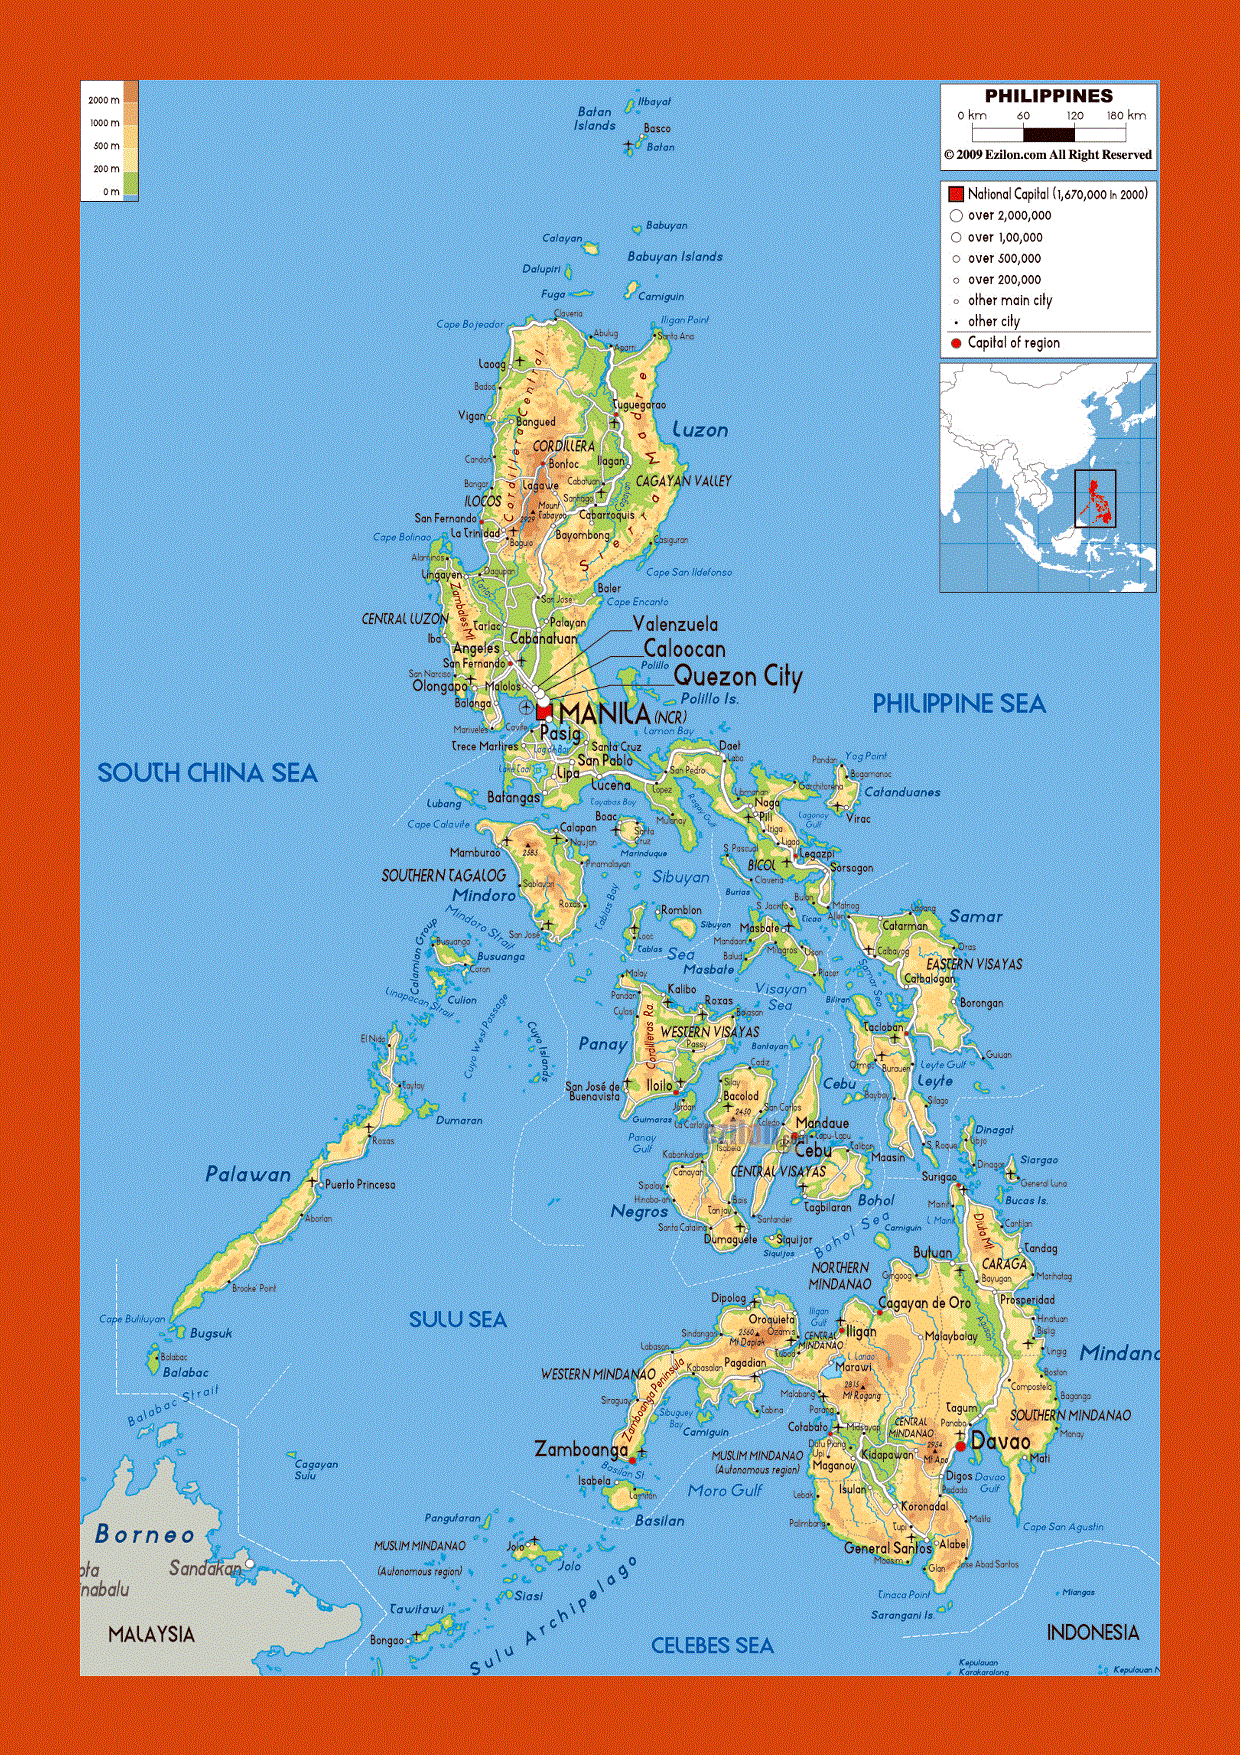 Physical map of Philippines